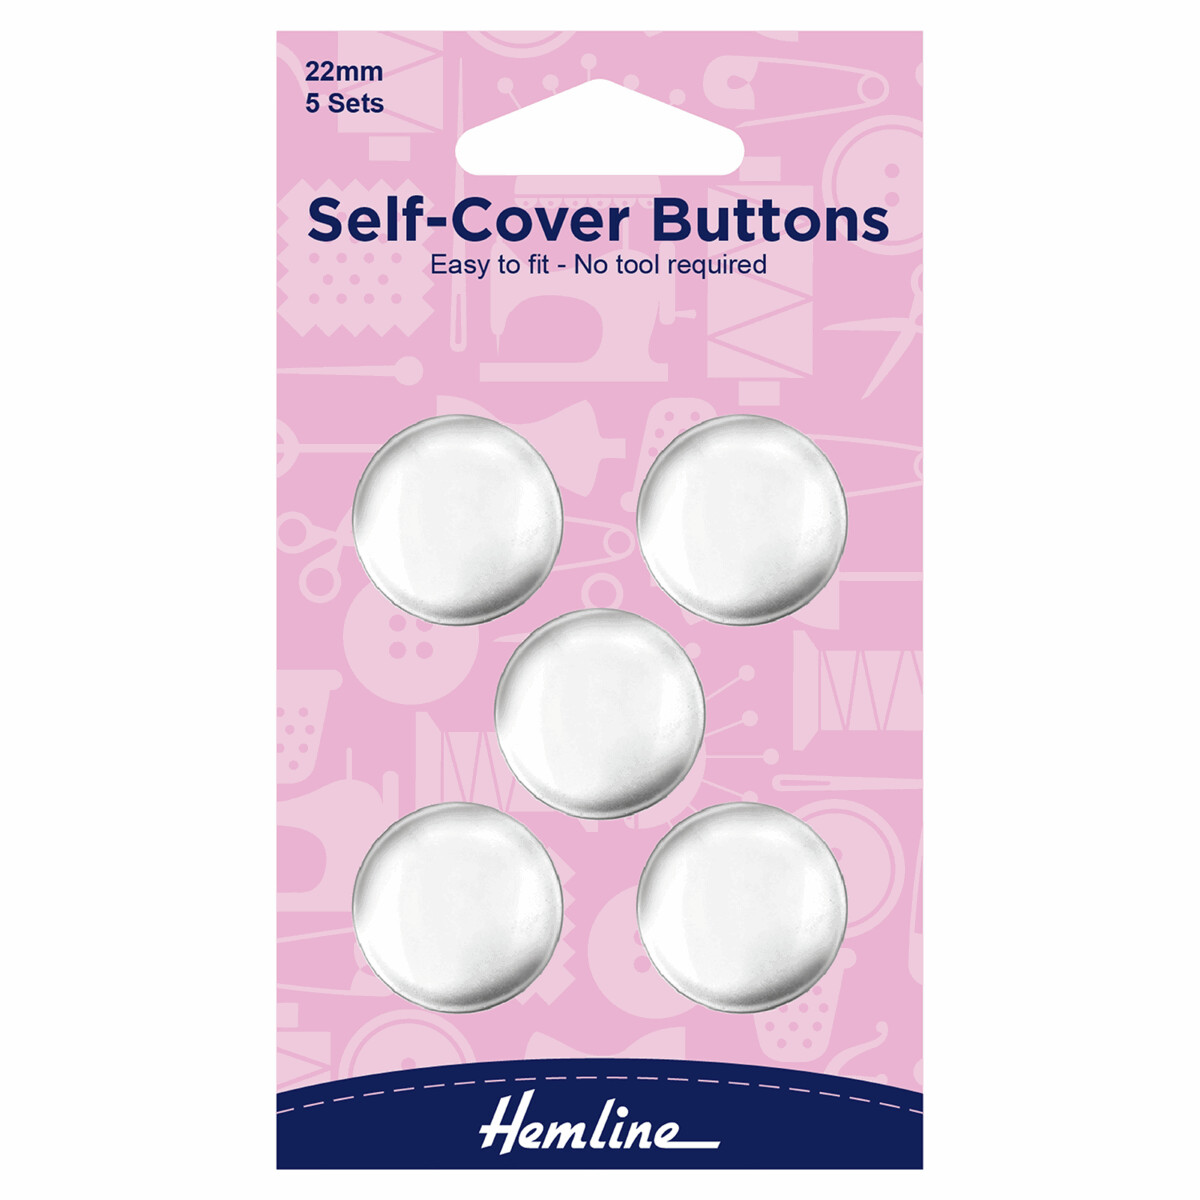 Self-Cover Buttons - 22mm: Metal